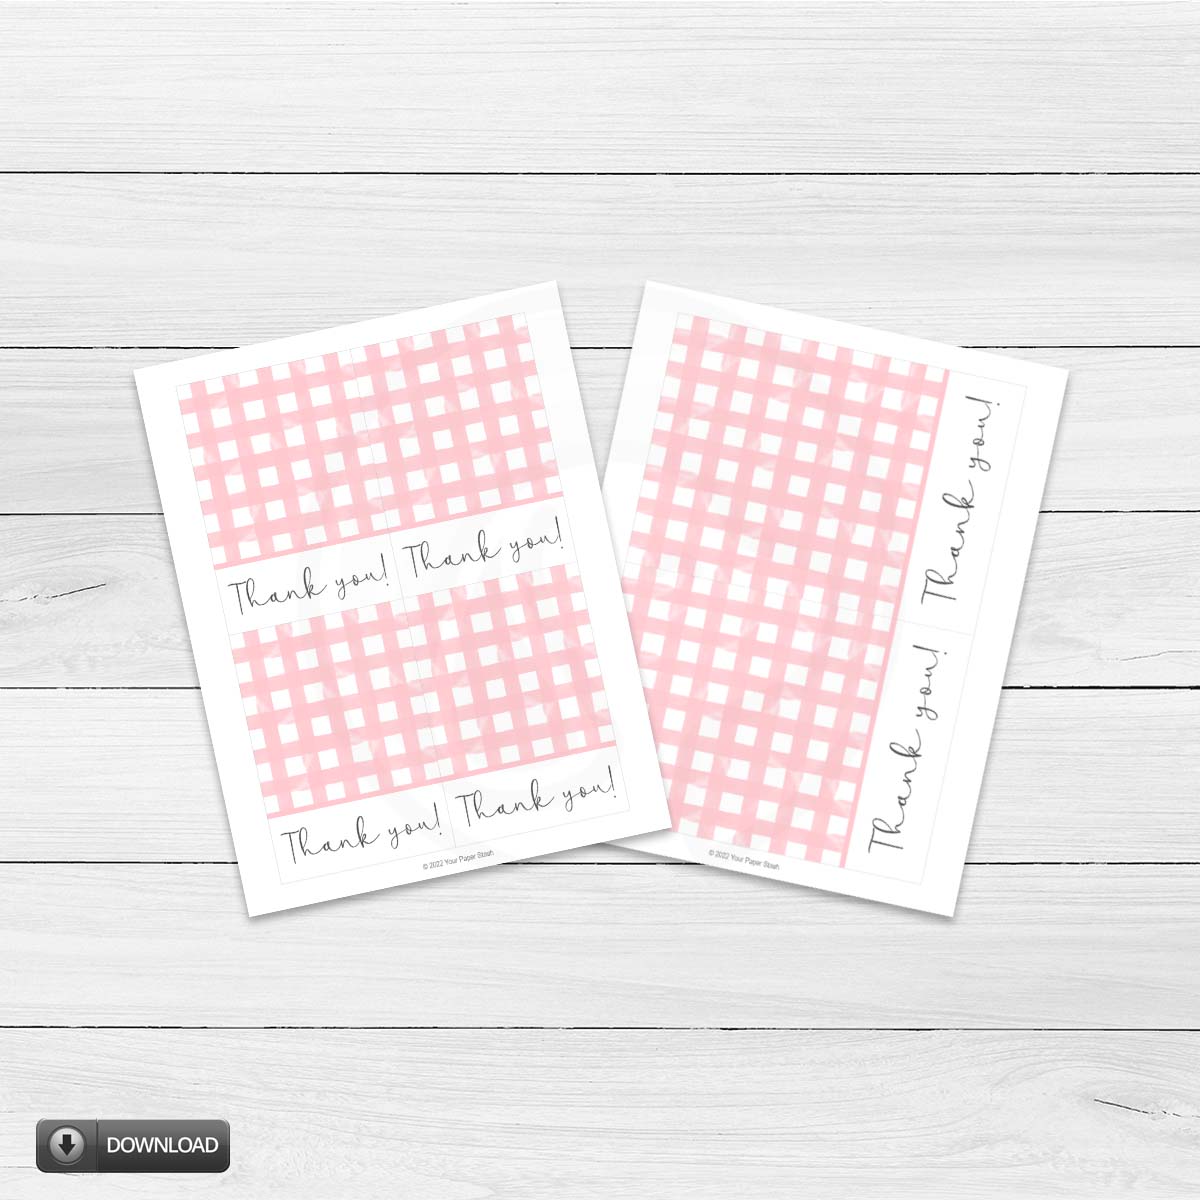 printable large and mini cookie cards, thank you note cards